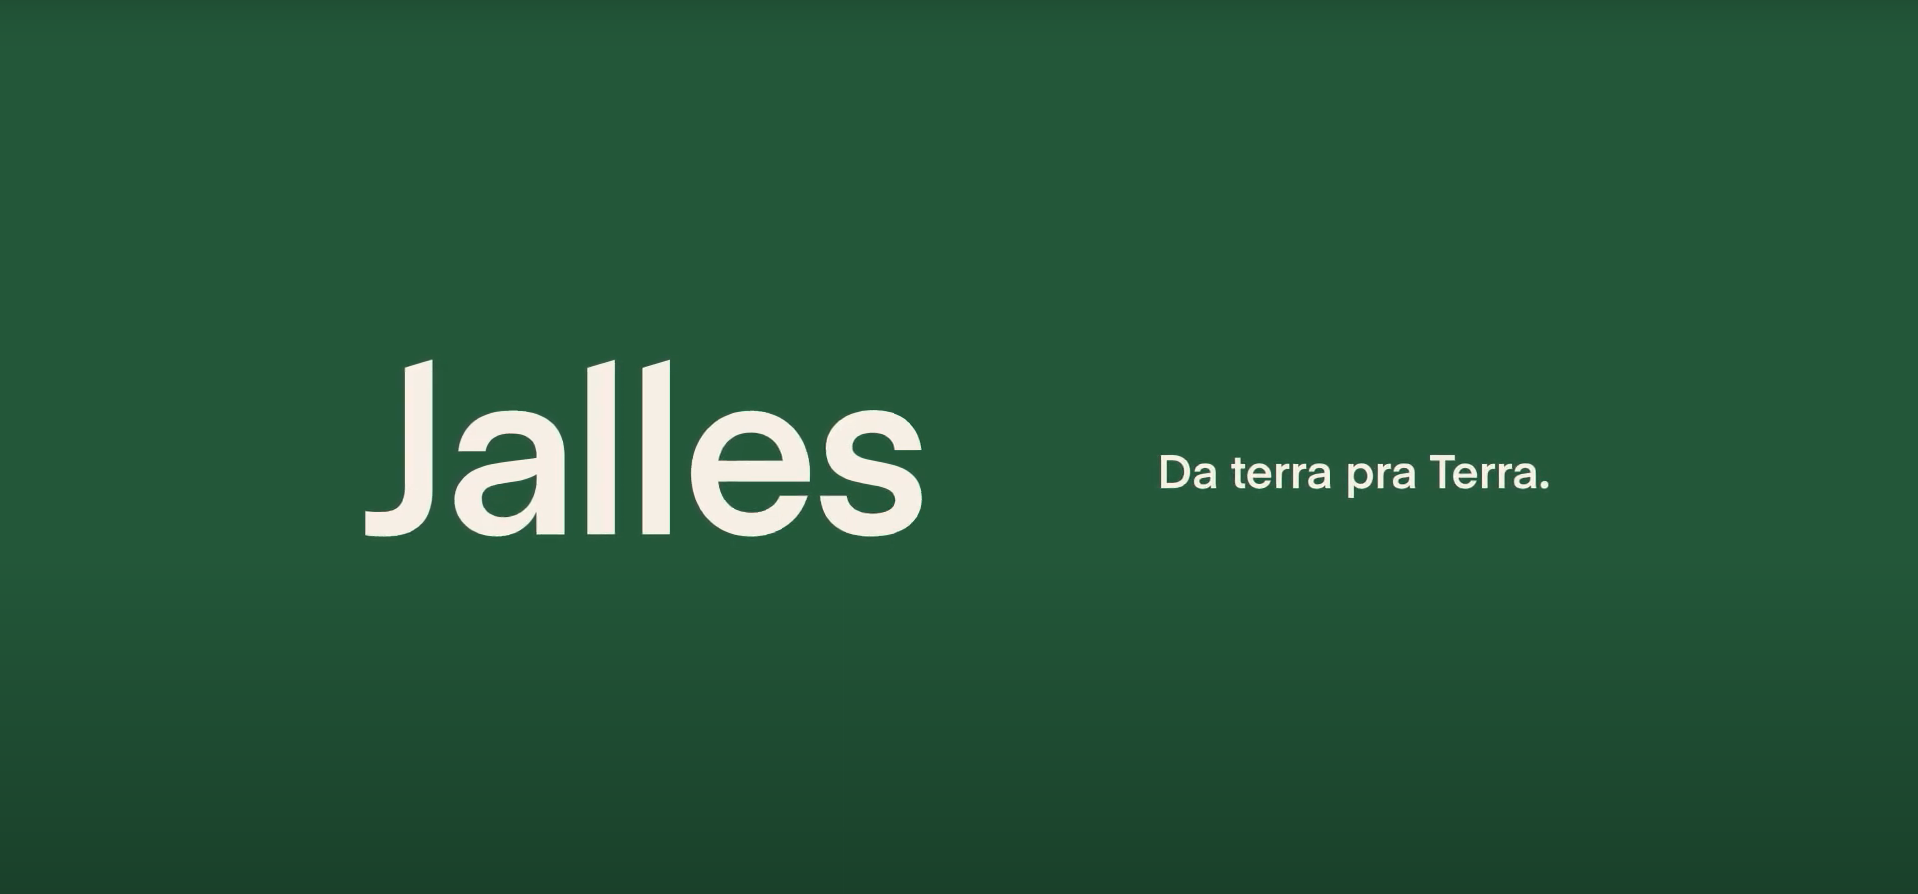 Jalles Machado changes its name and launches a new brand